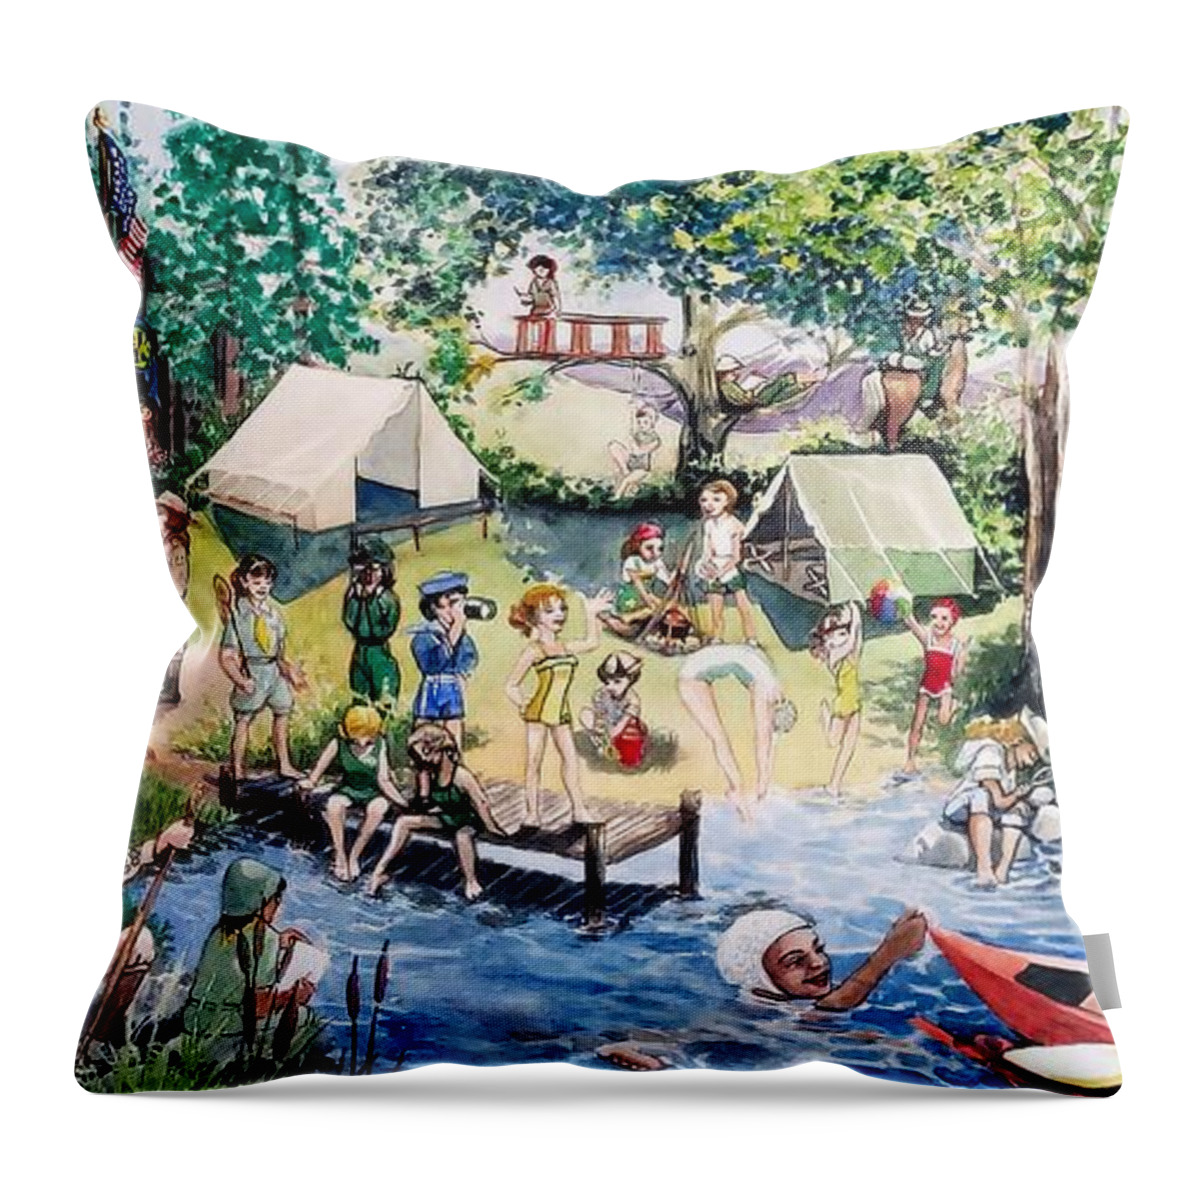 Girls Throw Pillow featuring the painting A century plus of outdoor fun for girls by Merana Cadorette